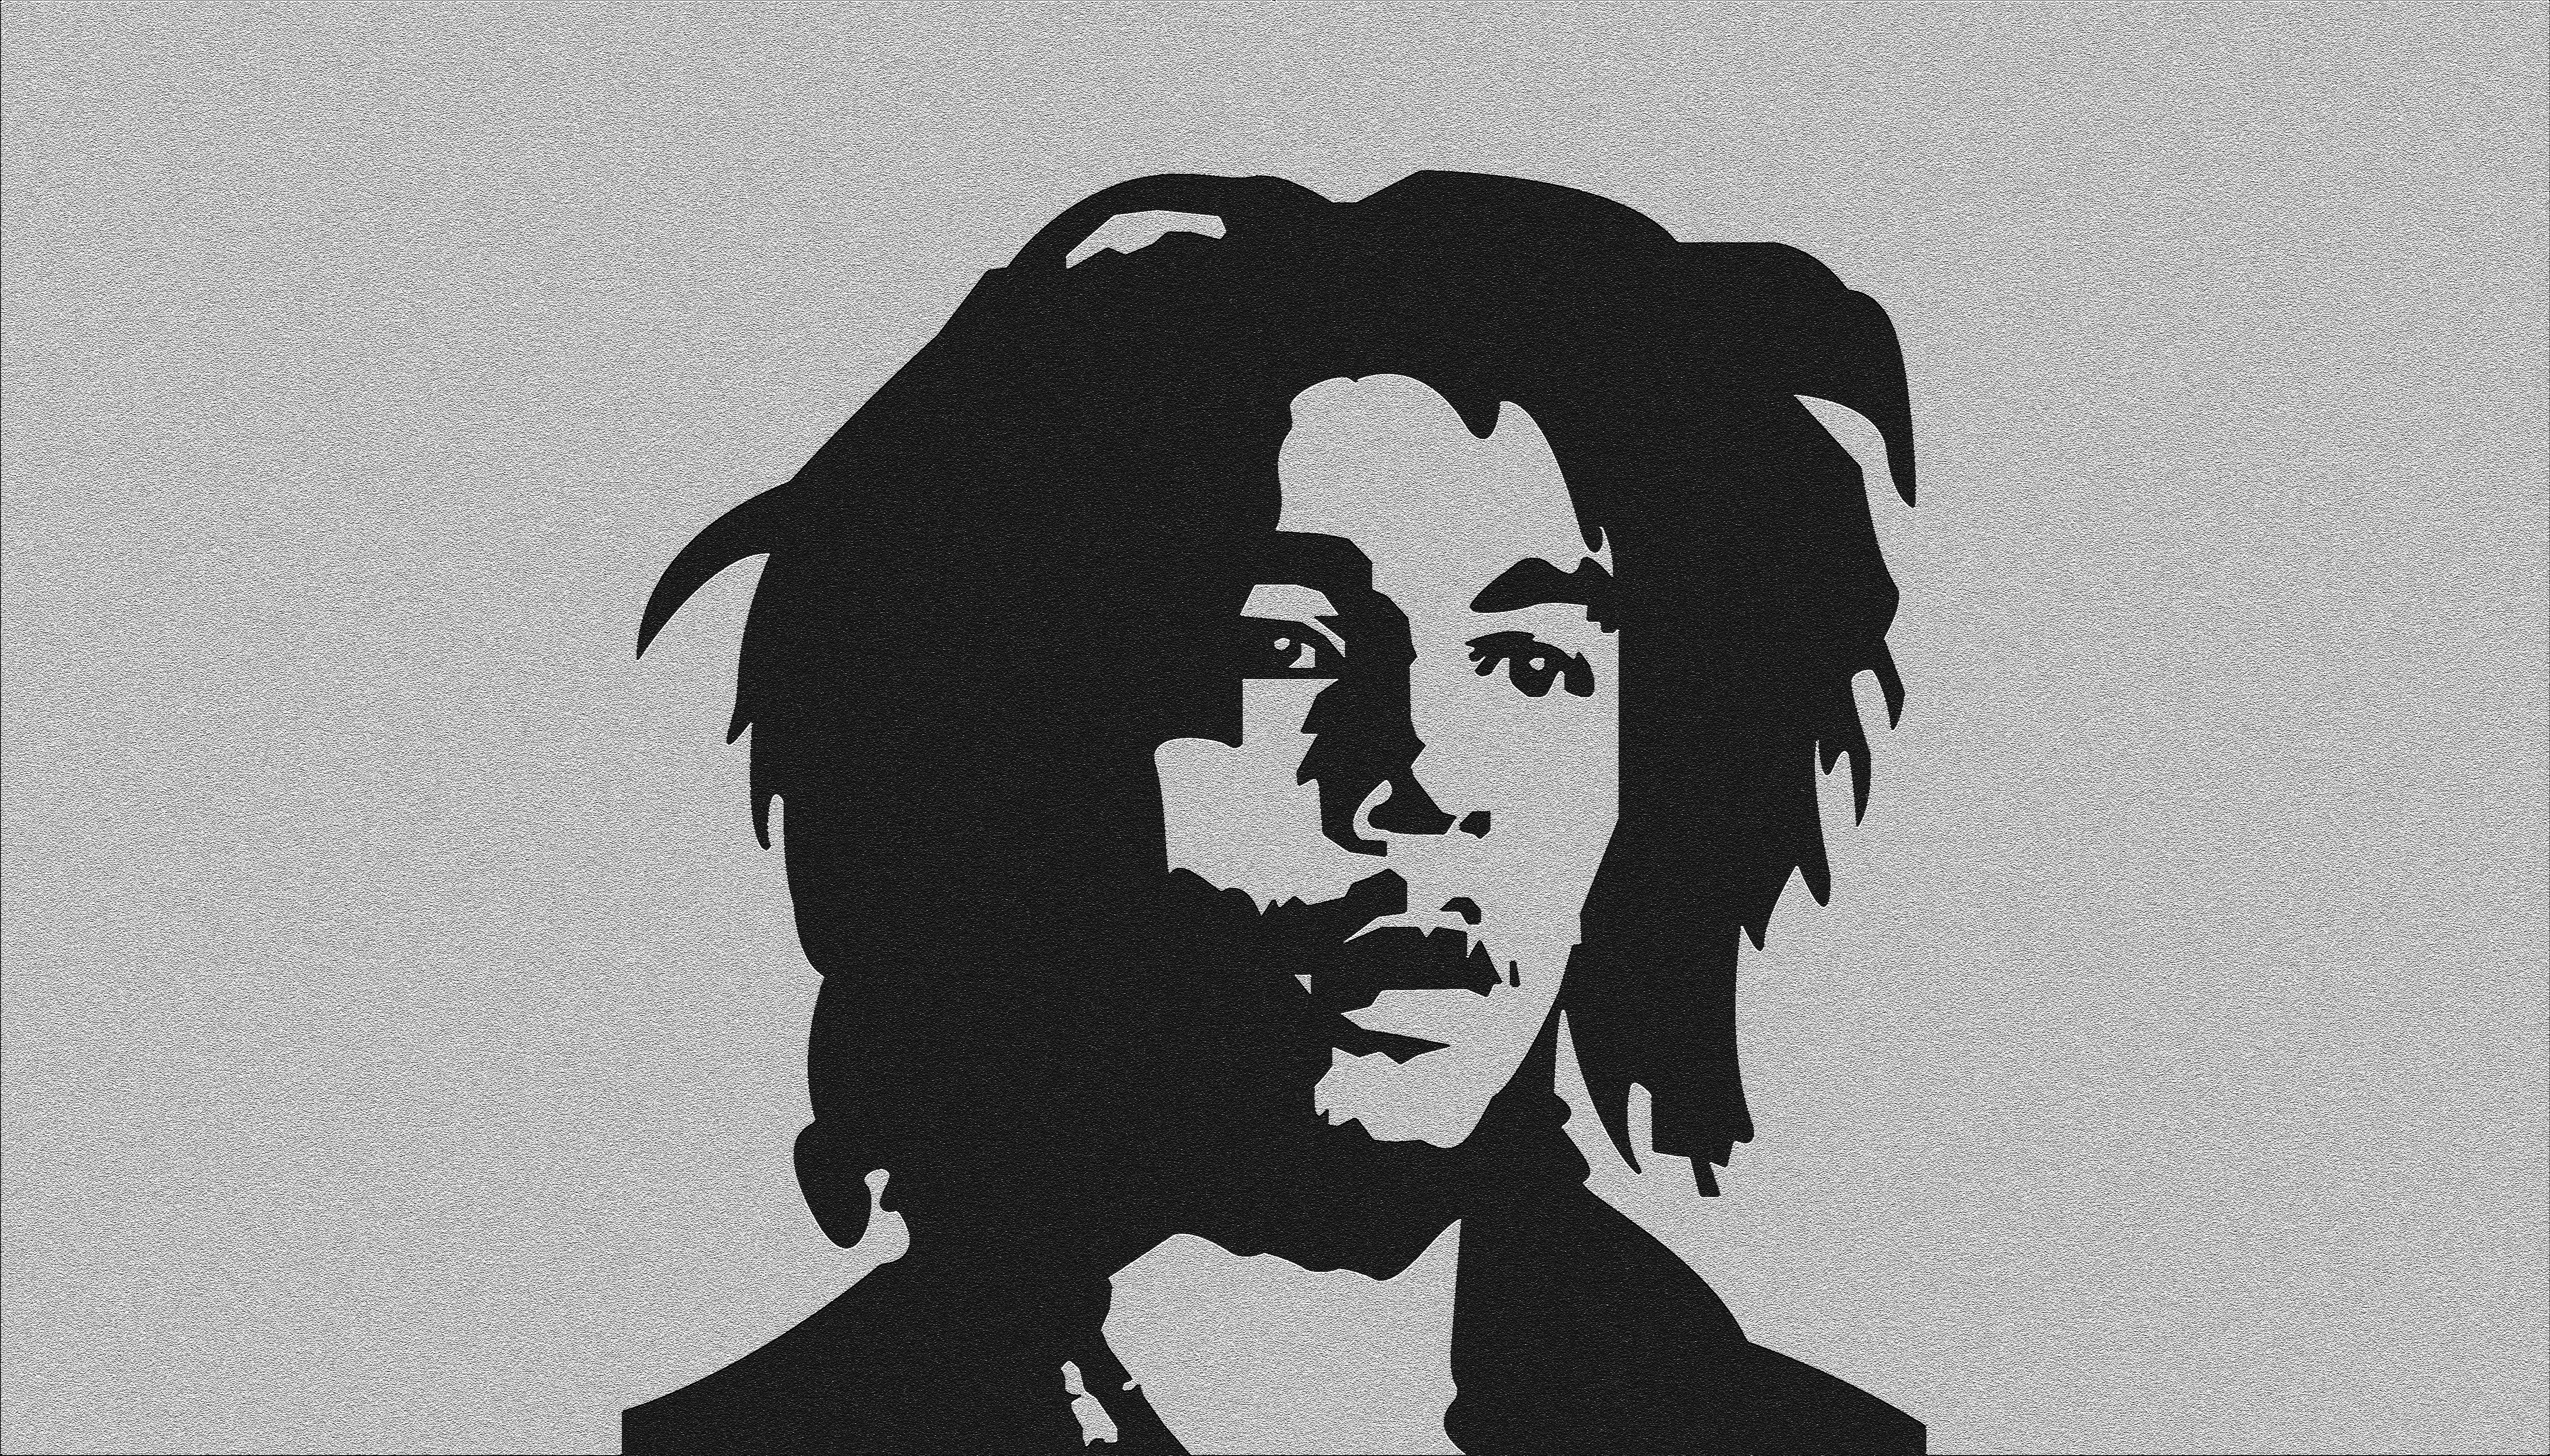 Simple Bob Marley Based On One Love Poster Bw2 By Arand4 On